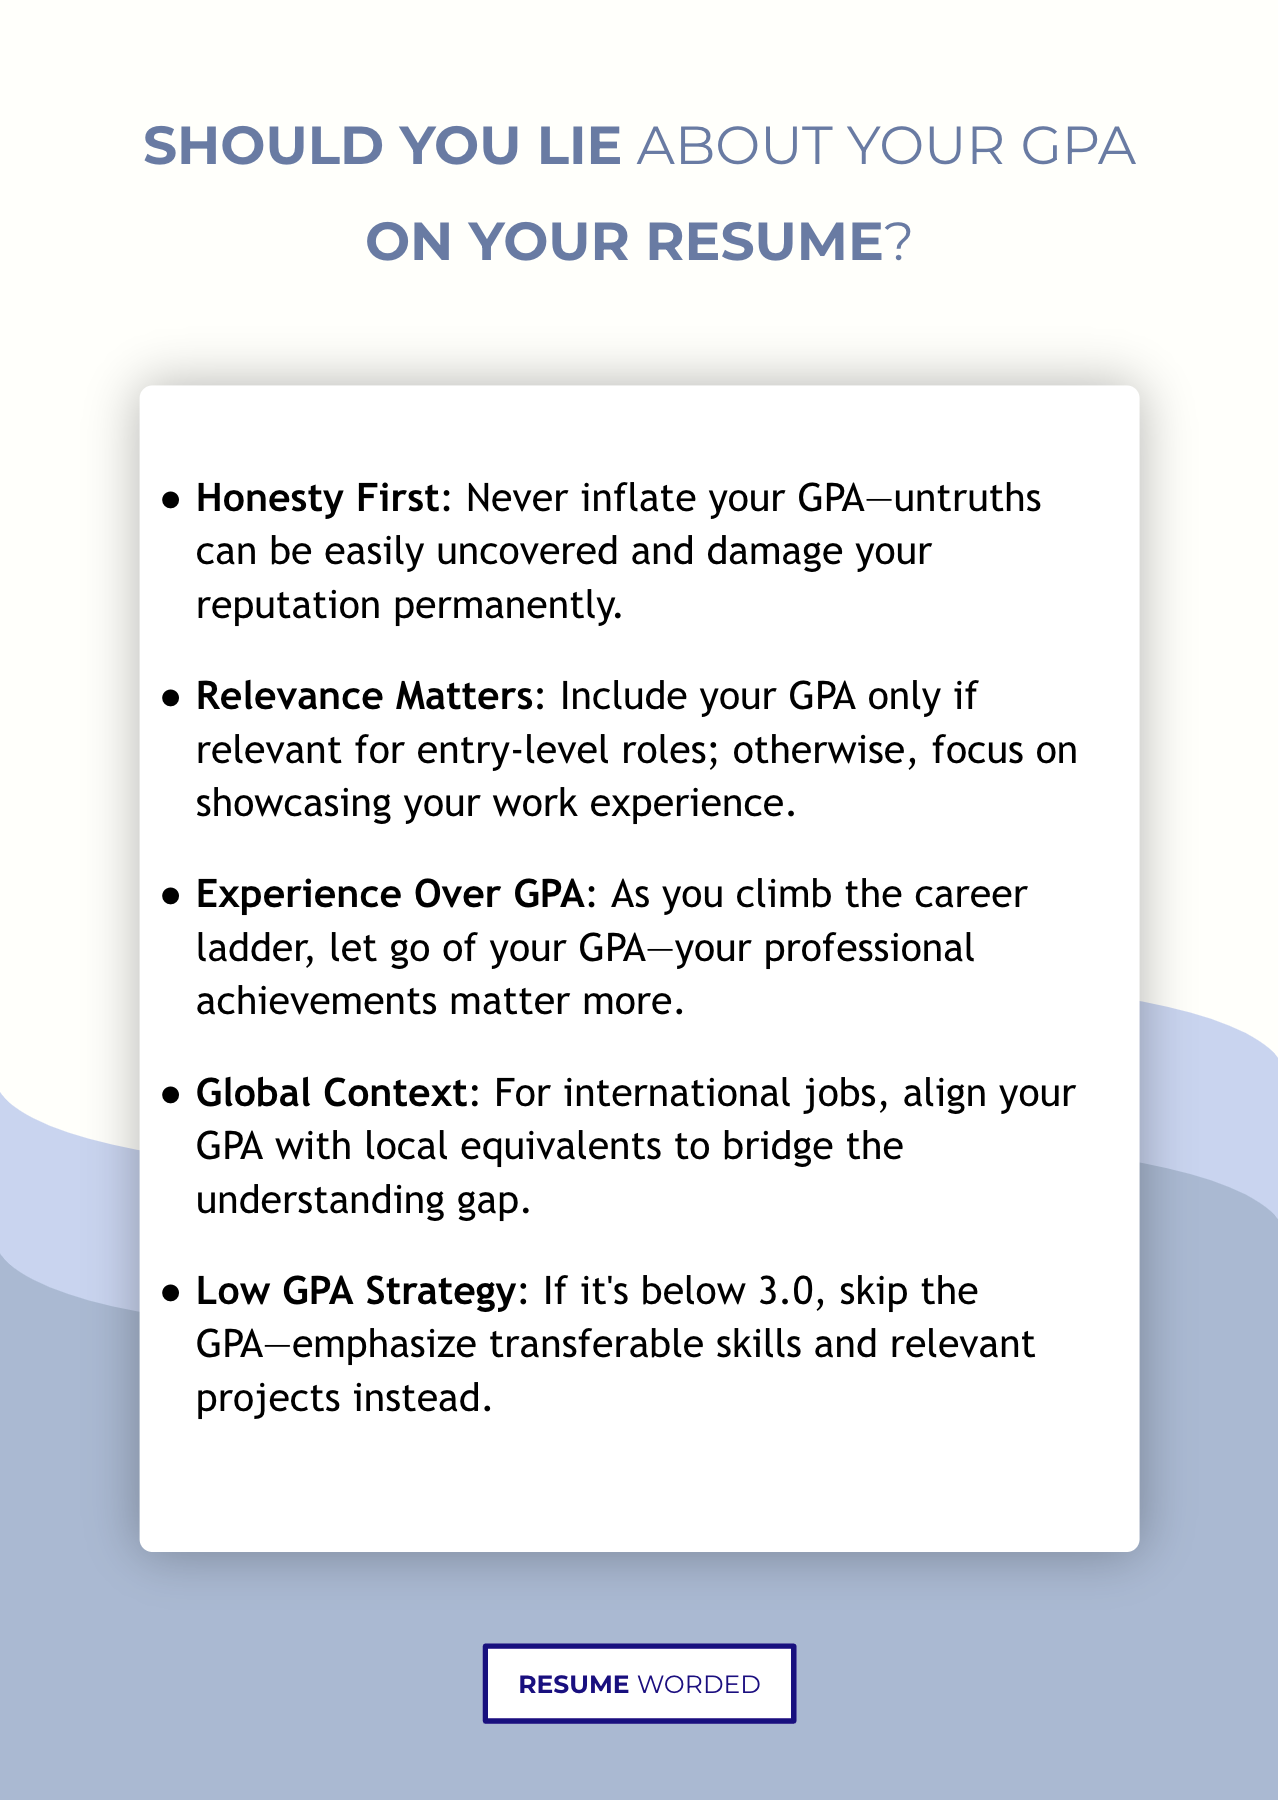 Key advice to remember when deciding whether or not to lie about your GPA on your resume